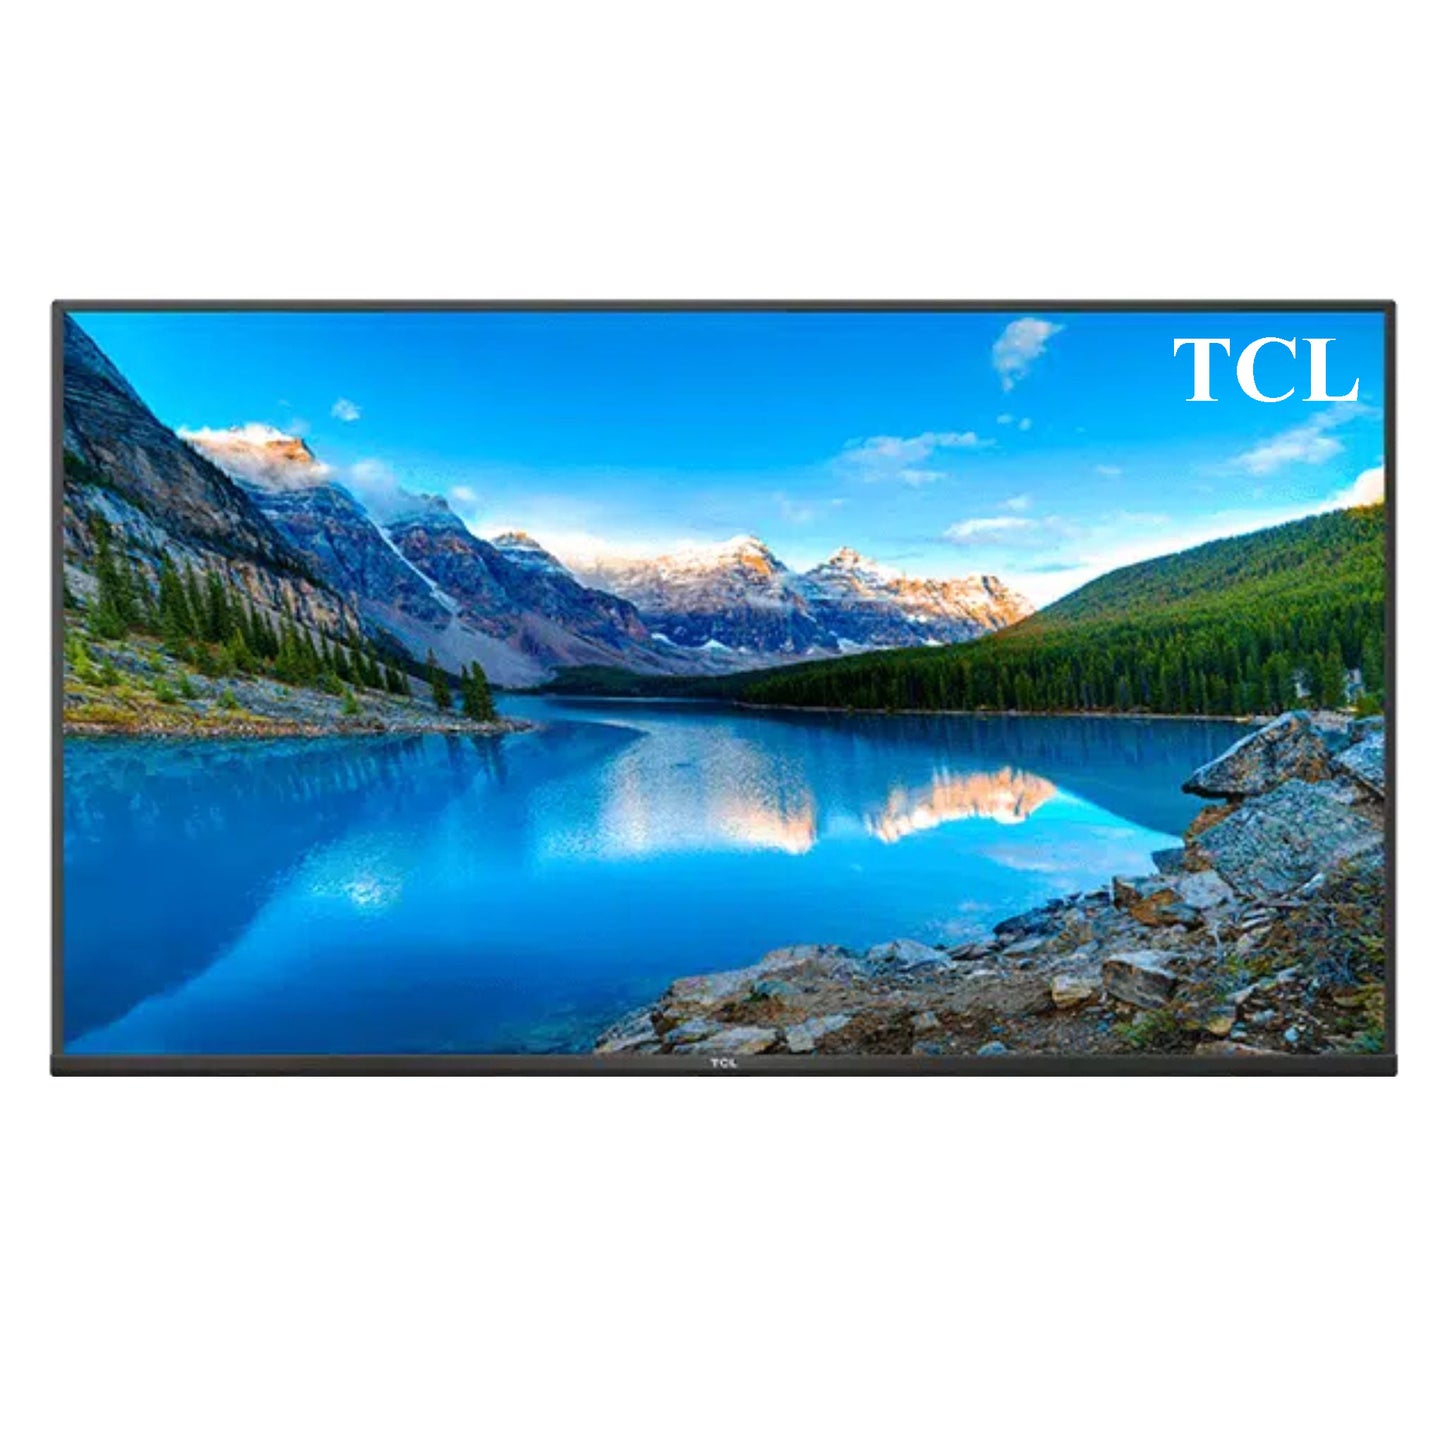 TCL 85 inch Smart TV, 85P735